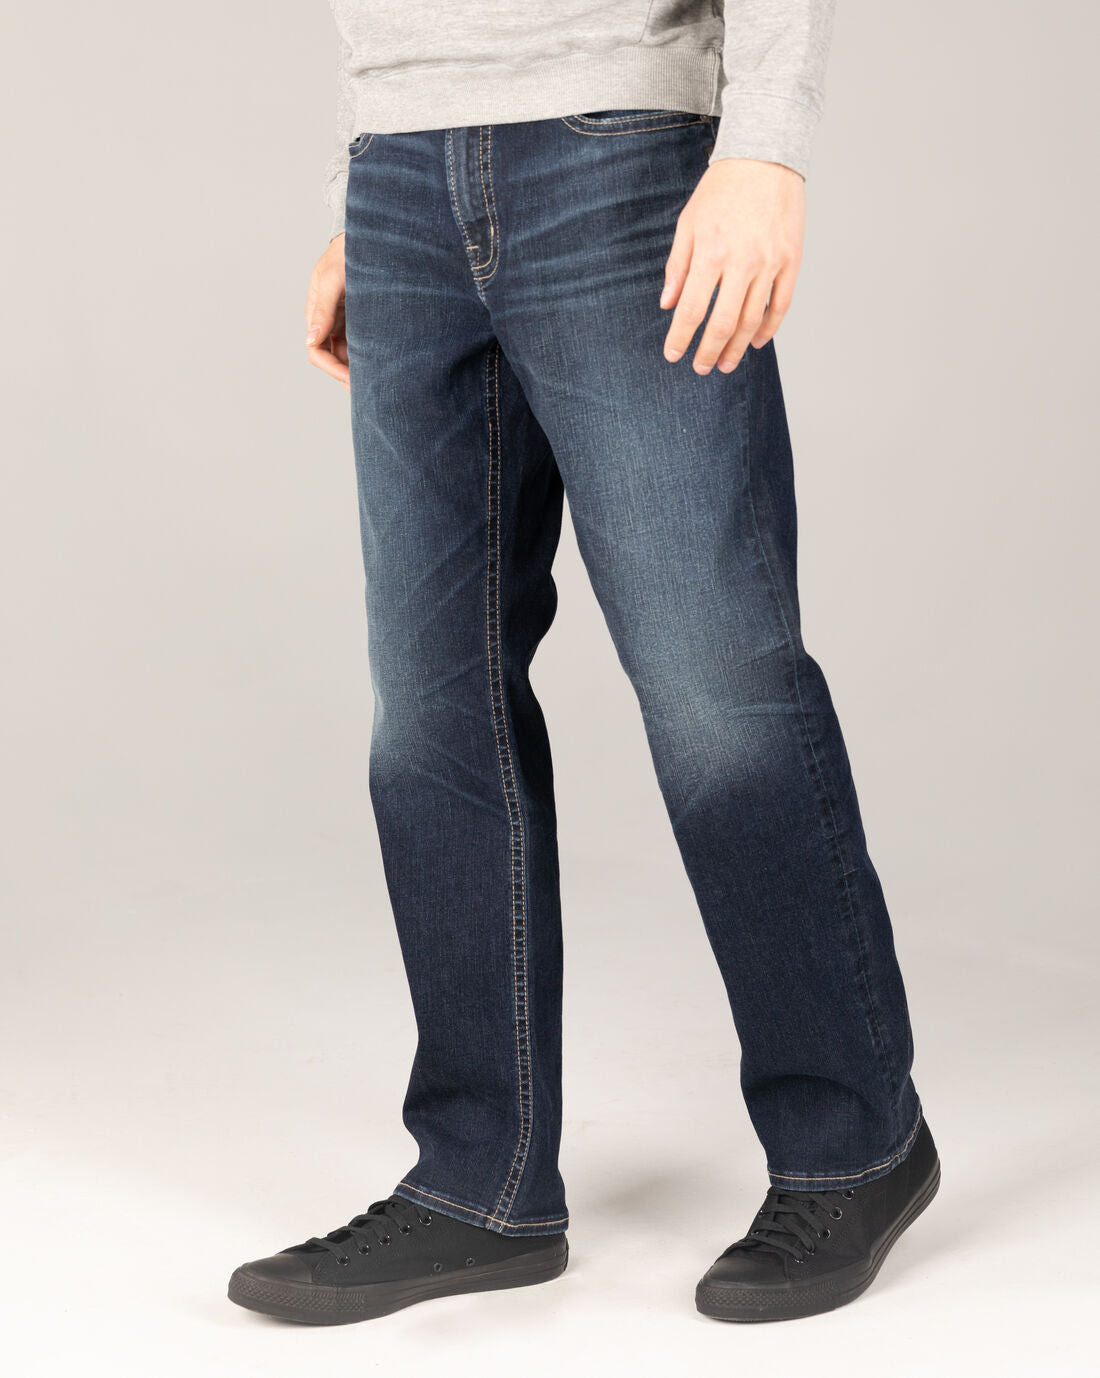 SILVER JEANS Grayson Easy Fit Straight Leg